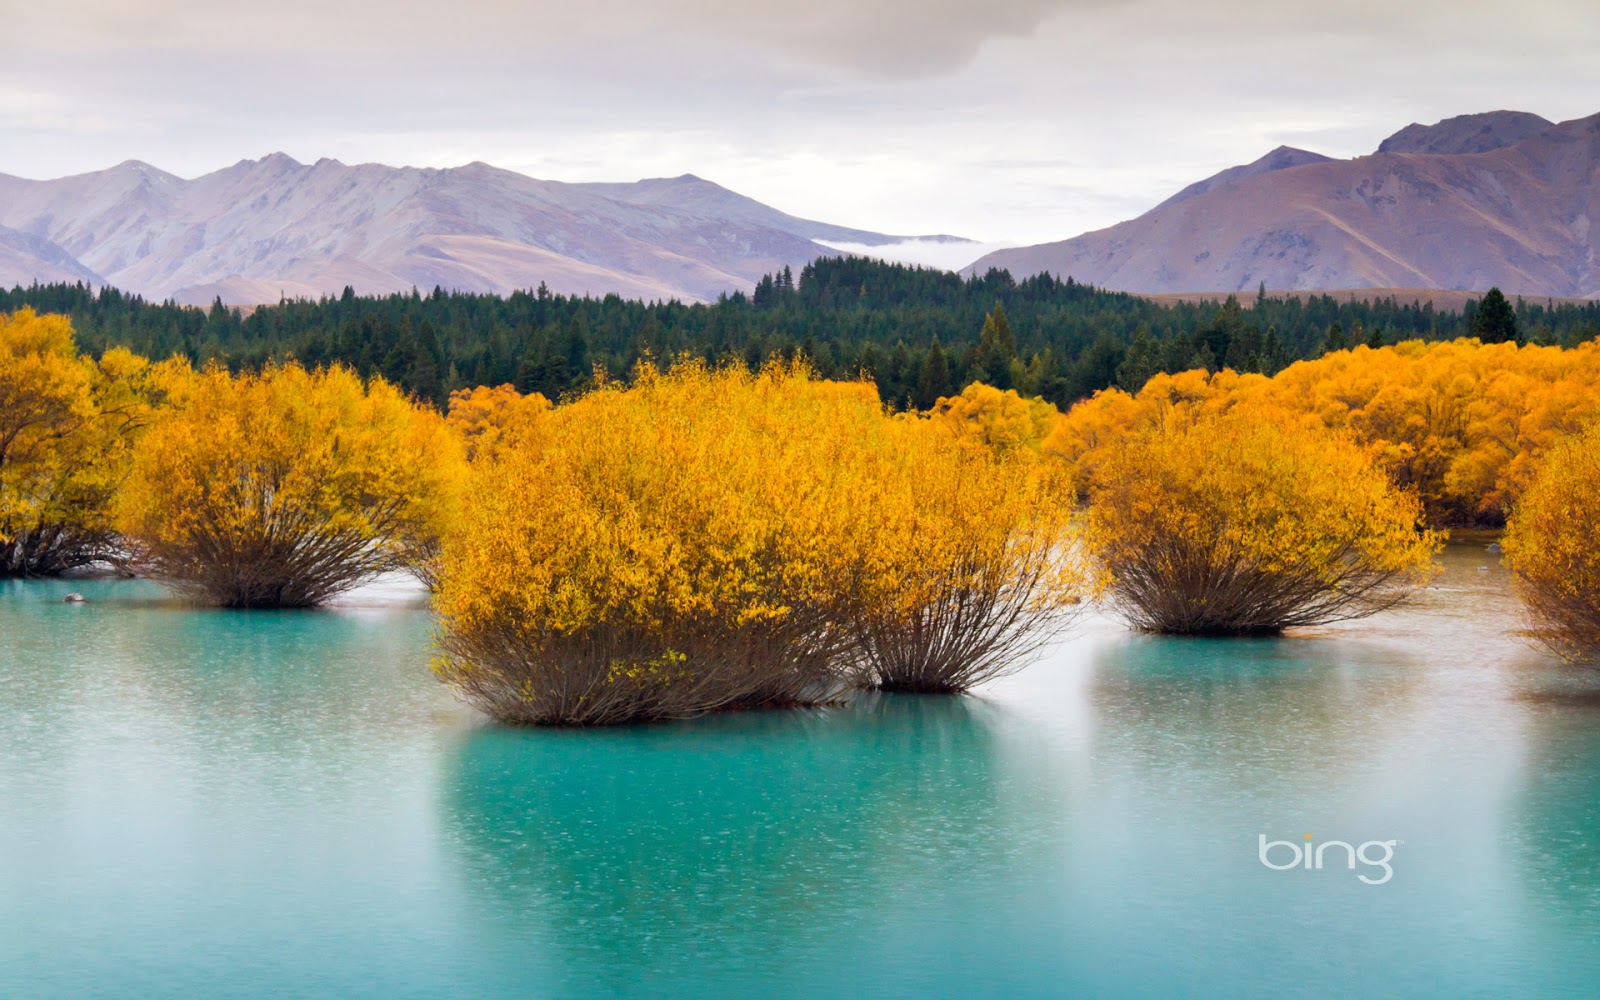 Bing Wallpapers [Daily] March 2013